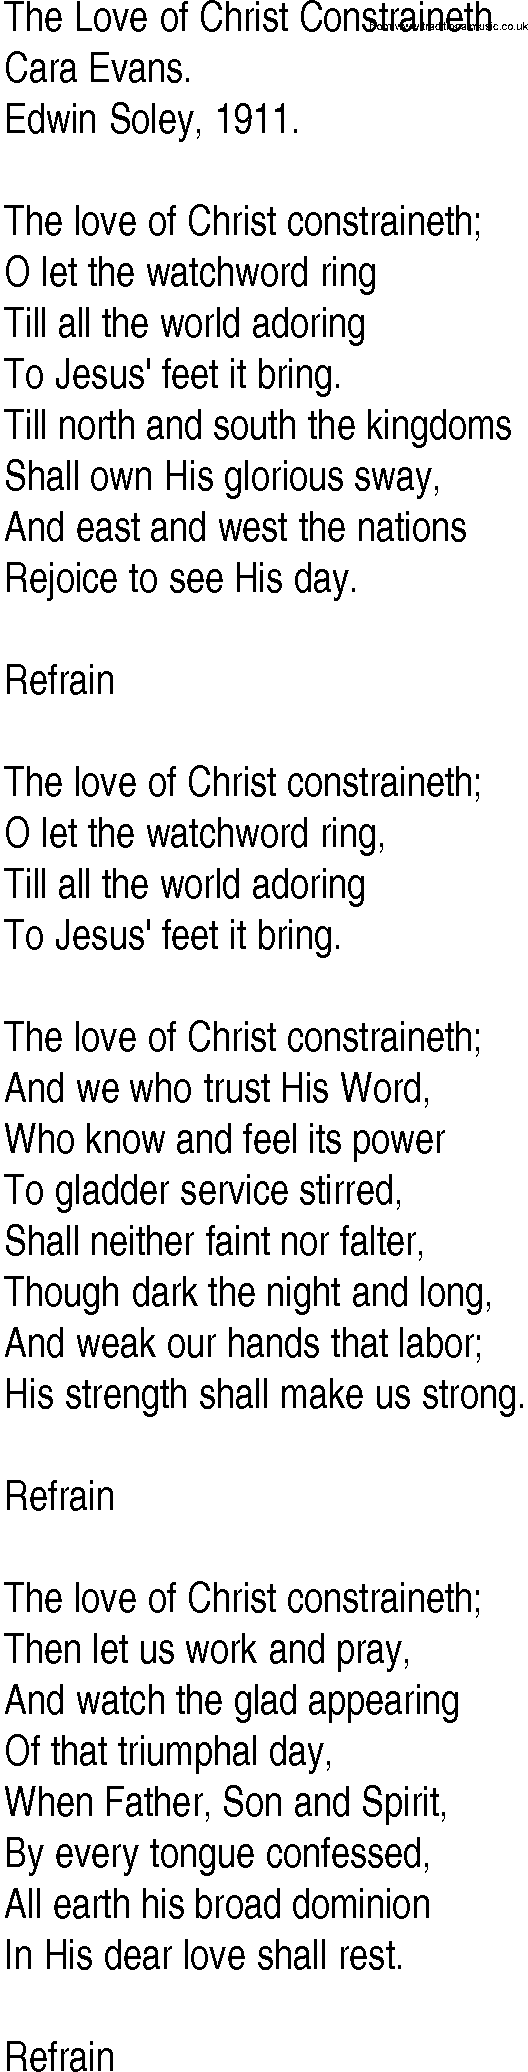 Hymn and Gospel Song: The Love of Christ Constraineth by Cara Evans lyrics